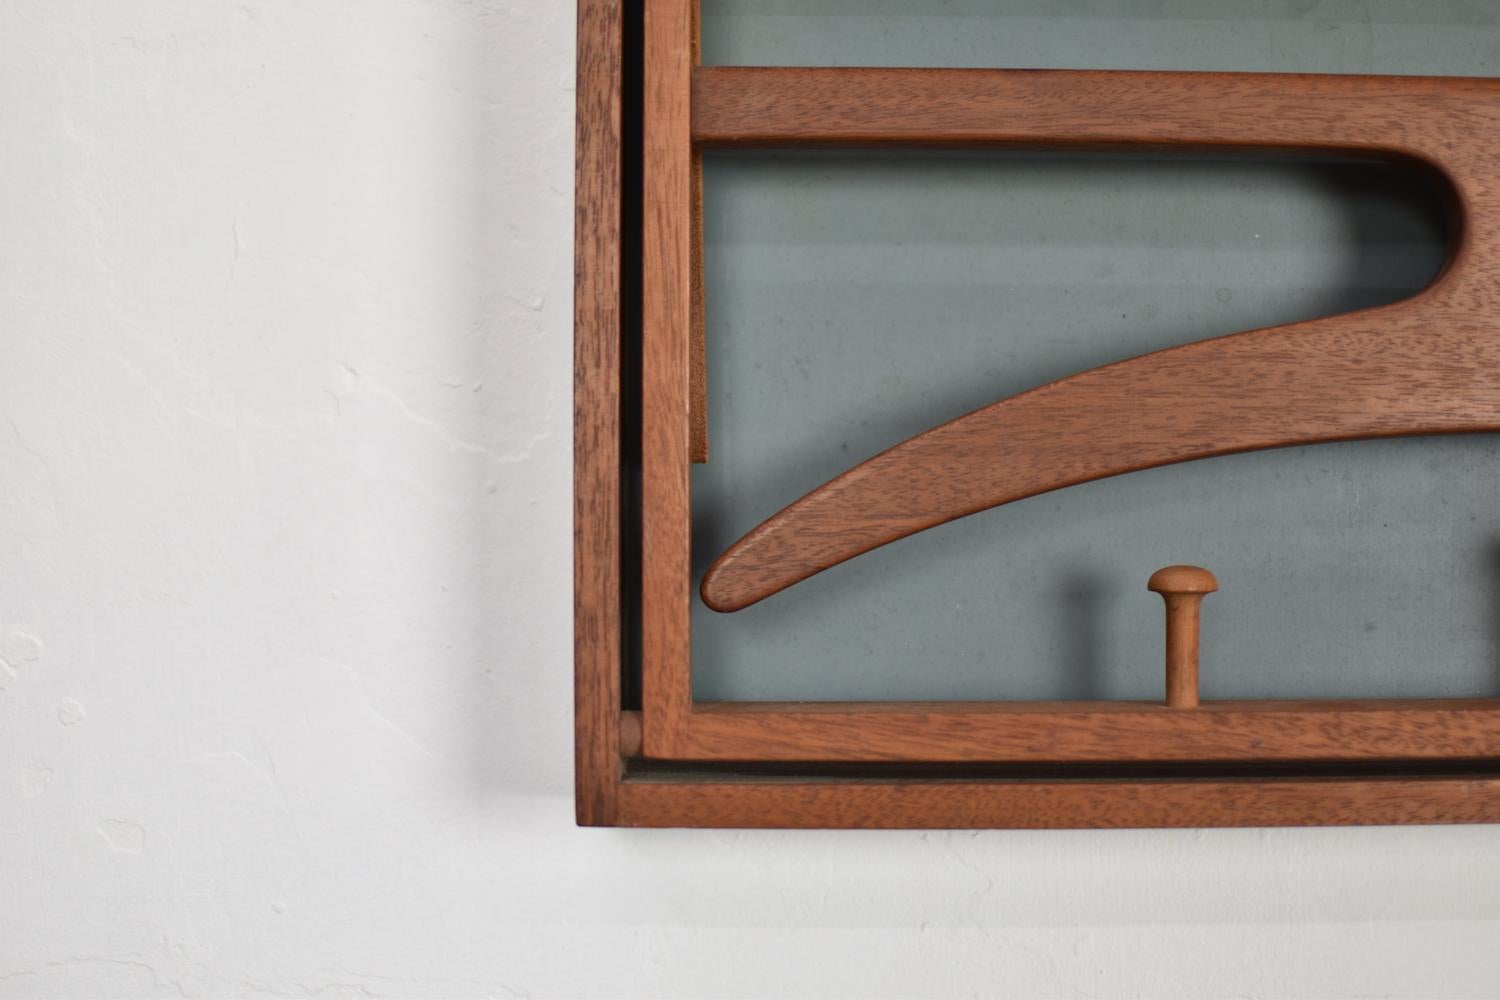 Authentic wall-mounted valet by Adam Hoff & Poul Østergaard for Virum Møbelsnedkeri, Denmark 1963. This lovely coat rack is made out of teak and got two naturel leather straps, the back is finished in dark green formica. Excellent condition with